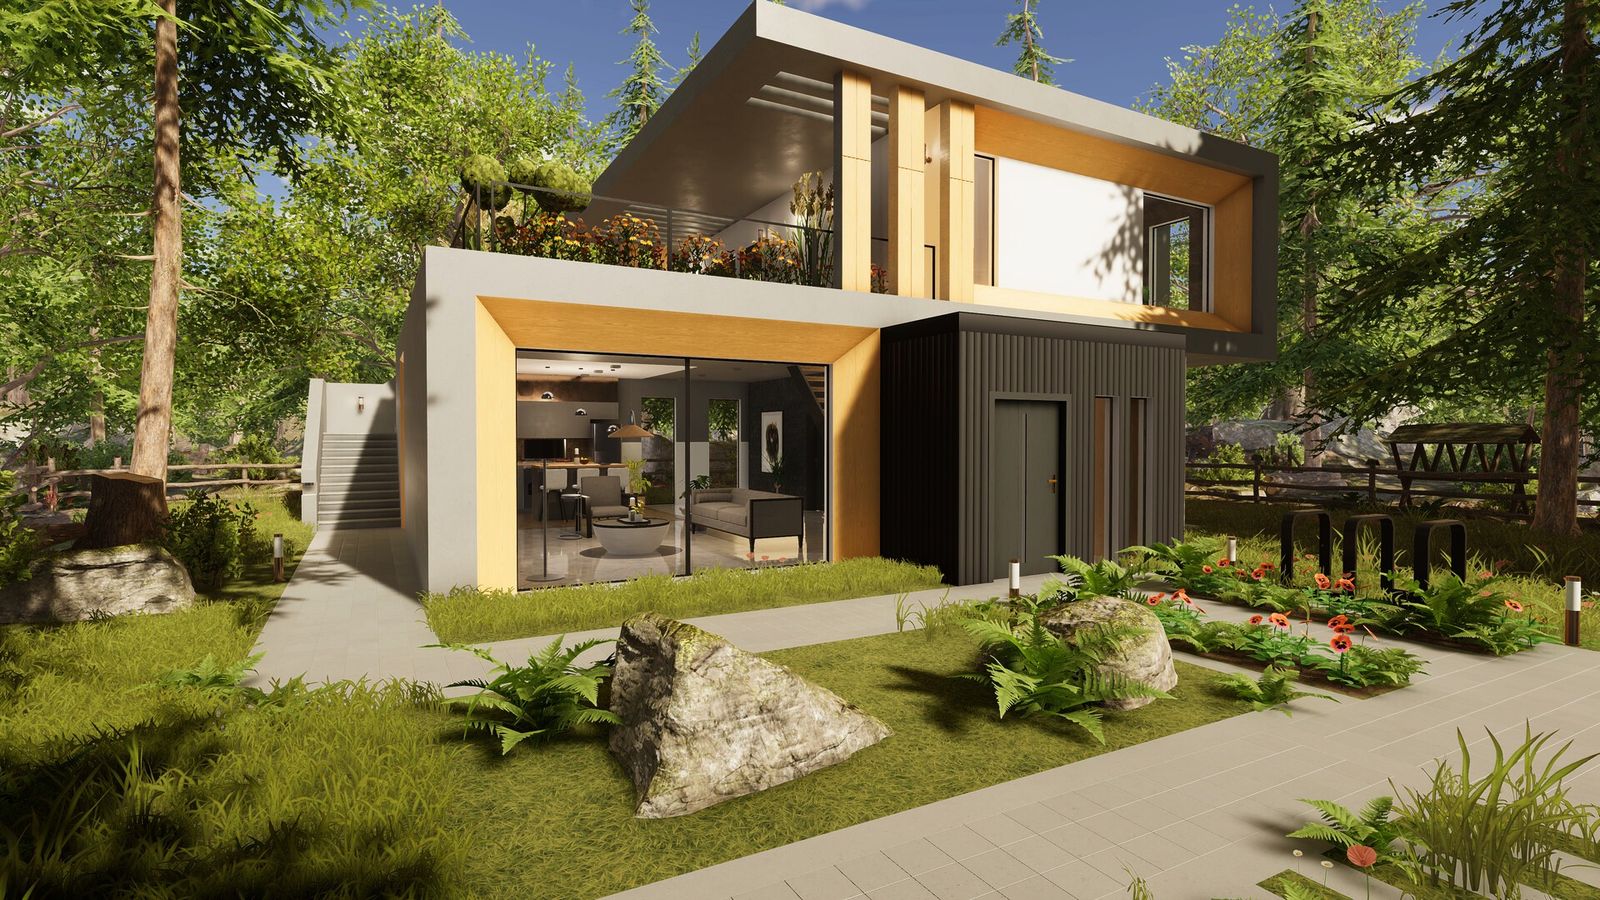 House Flipper 2 - a modern house with a winding path through the garden, surrounded by trees